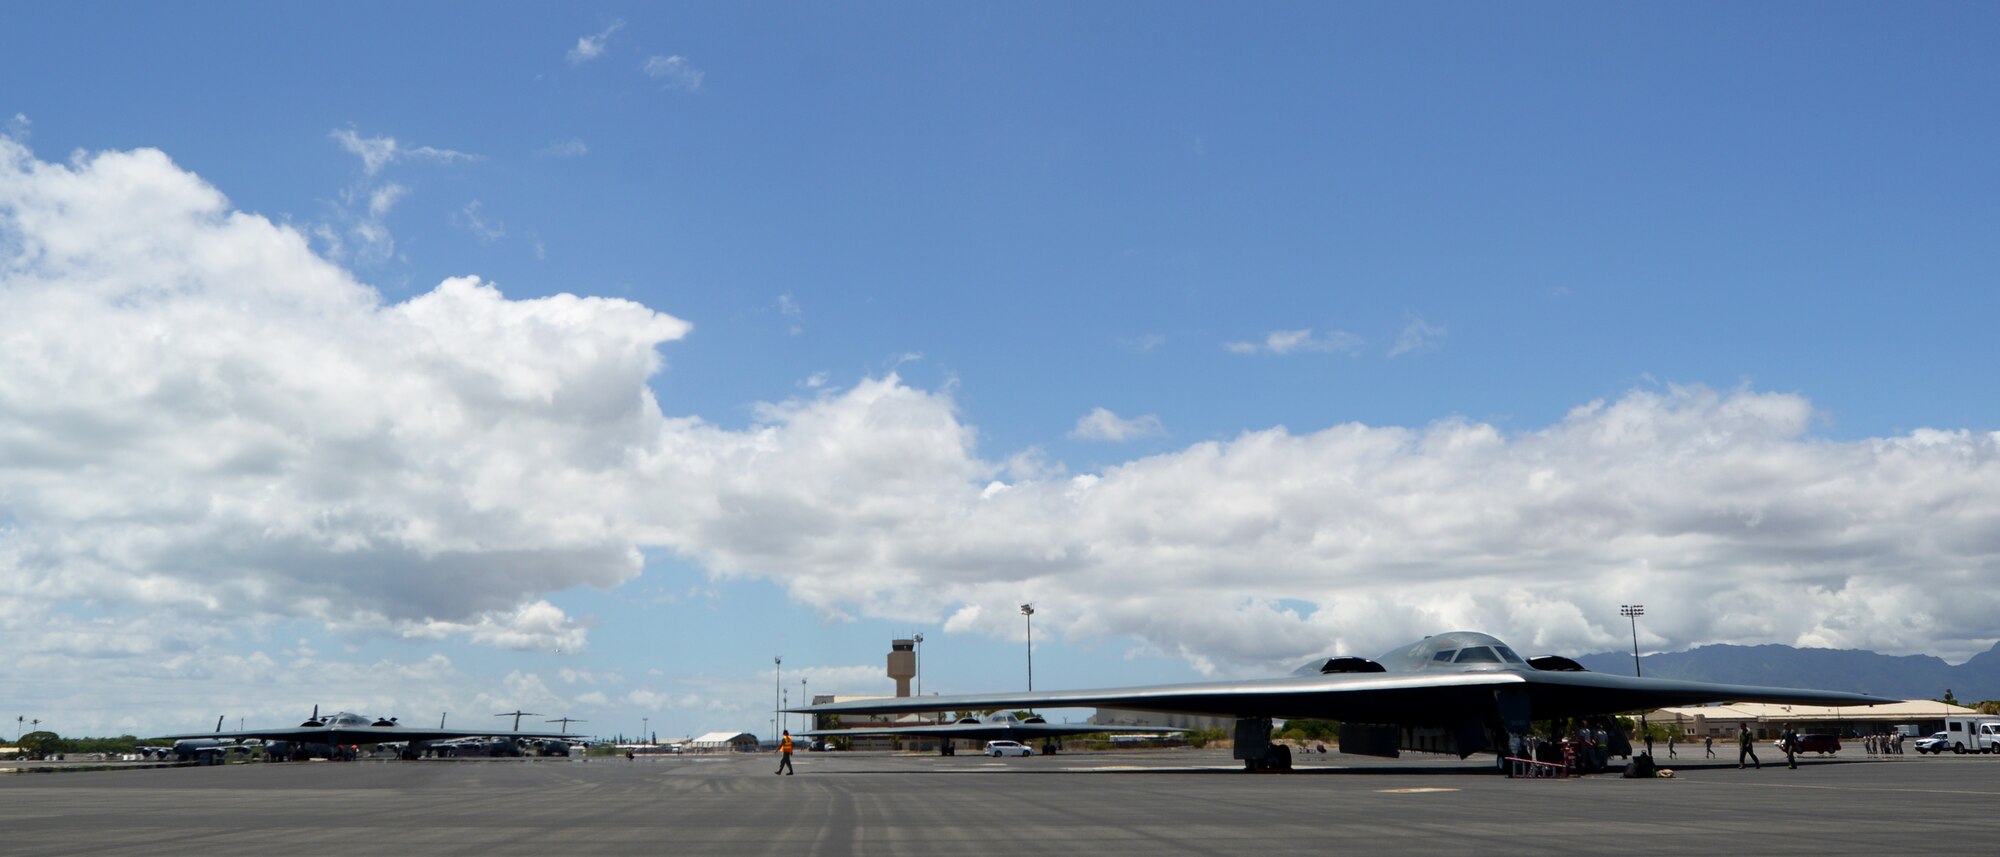 U.S. Air Force B-2 Spirits, deployed from Whiteman Air Force Base, Missouri, land at Joint Base Pearl Harbor-Hickam, Hawaii, Aug. 15, 2018. B-2s regularly rotate through the Indo-Pacific to conduct routine air operations, which integrate capabilities with key regional partners and demonstrate U.S. commitment to peace and stability in the region. These operations are in support of the U.S. Strategic Command’s Bomber Task Force deployment. (U.S. Air Force photo by Staff Sgt. Danielle Quilla)